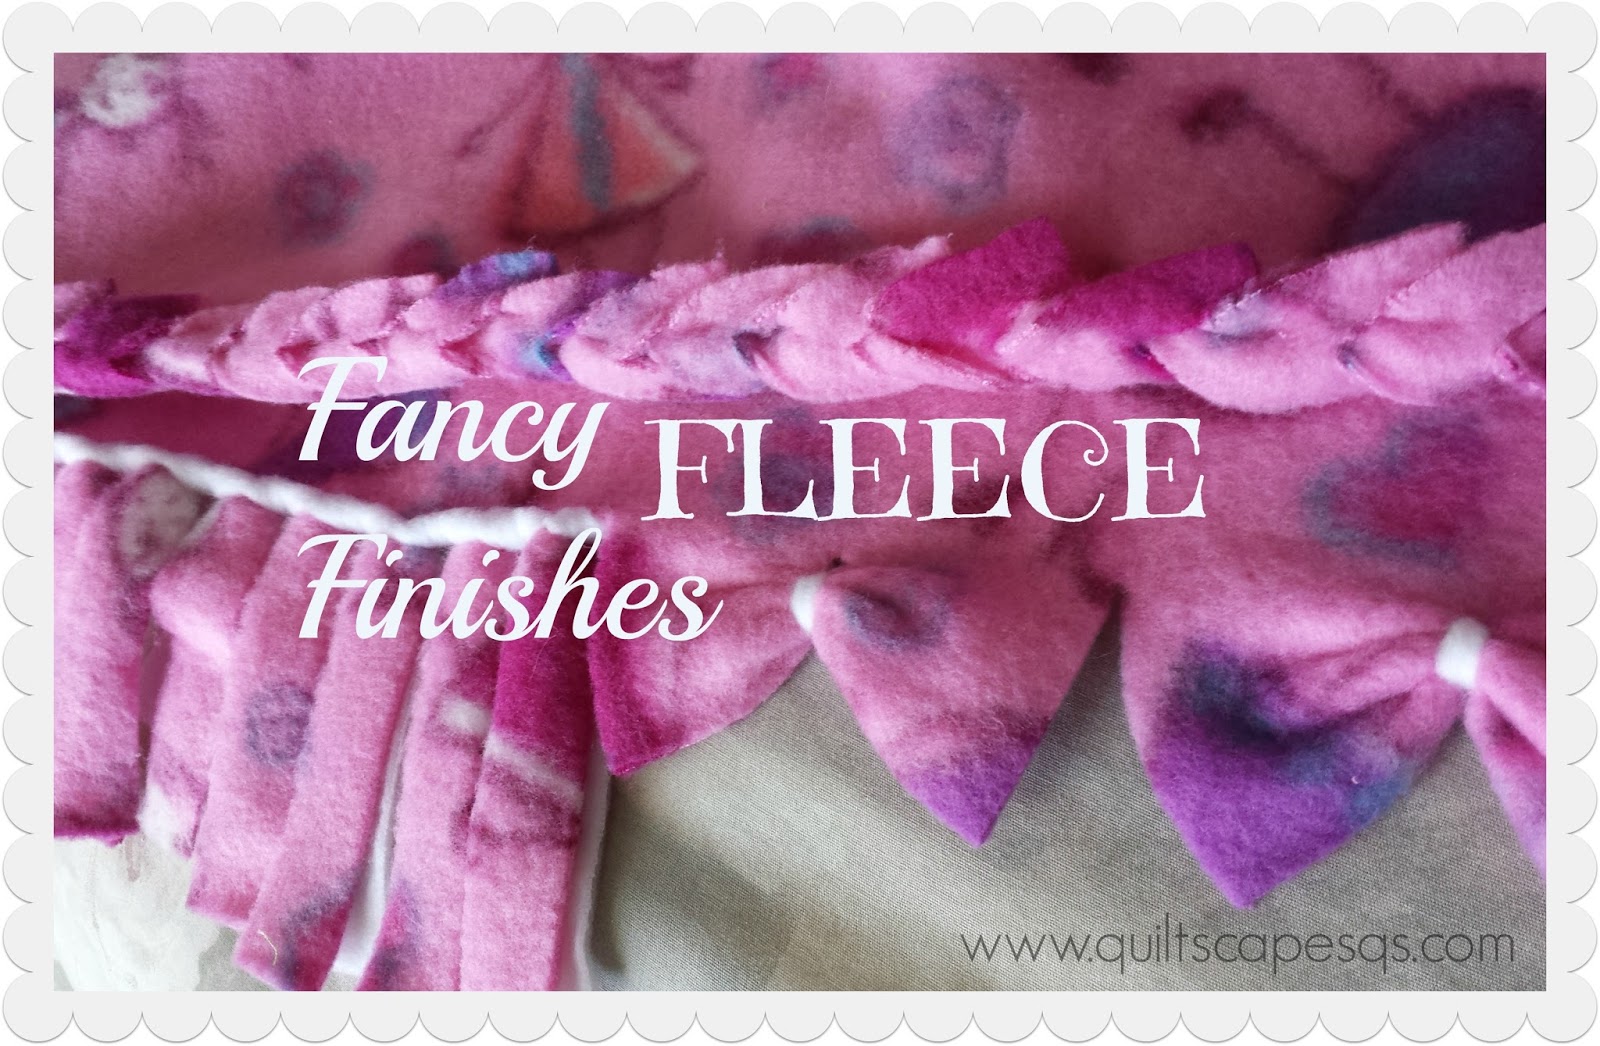 How to Sew and Finish a Fleece Blanket